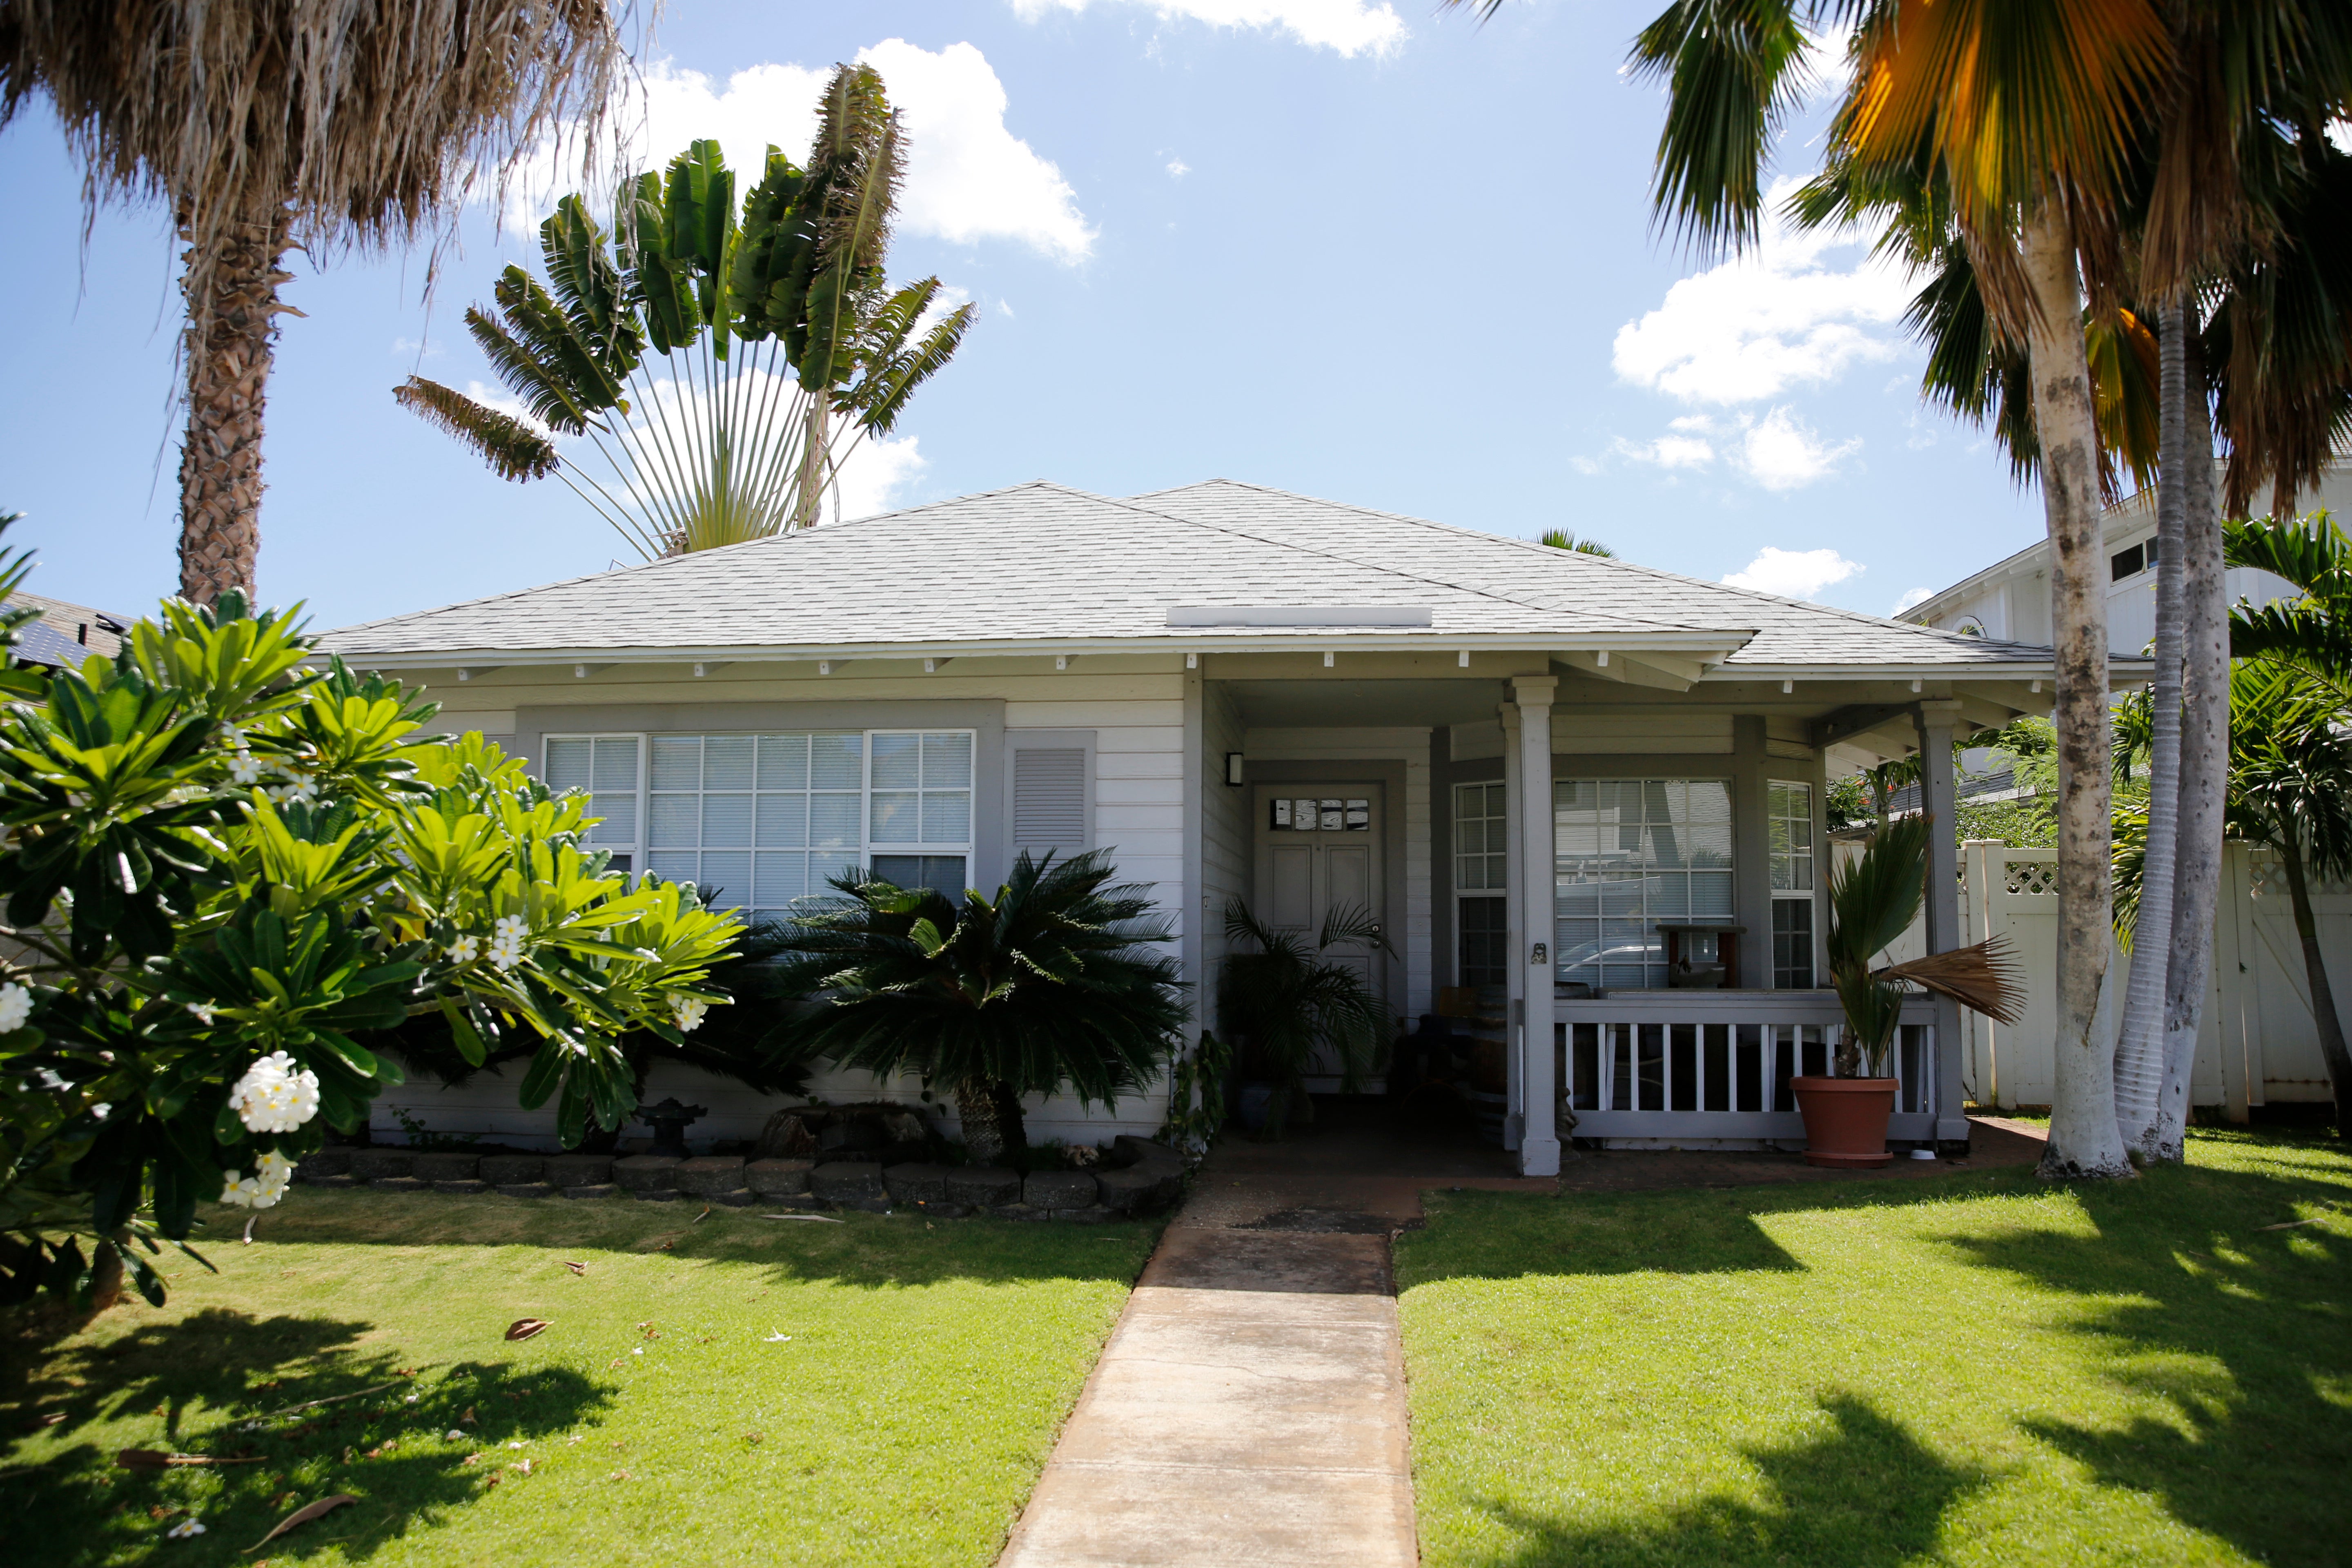 The home where US defense contractor Walter Glenn Primrose and his wife, Gwynn Darlle Morrison, lived for years allegedly under aliases is pictured, Wednesday, July 27, 2022, in Kapolei, Hawaii